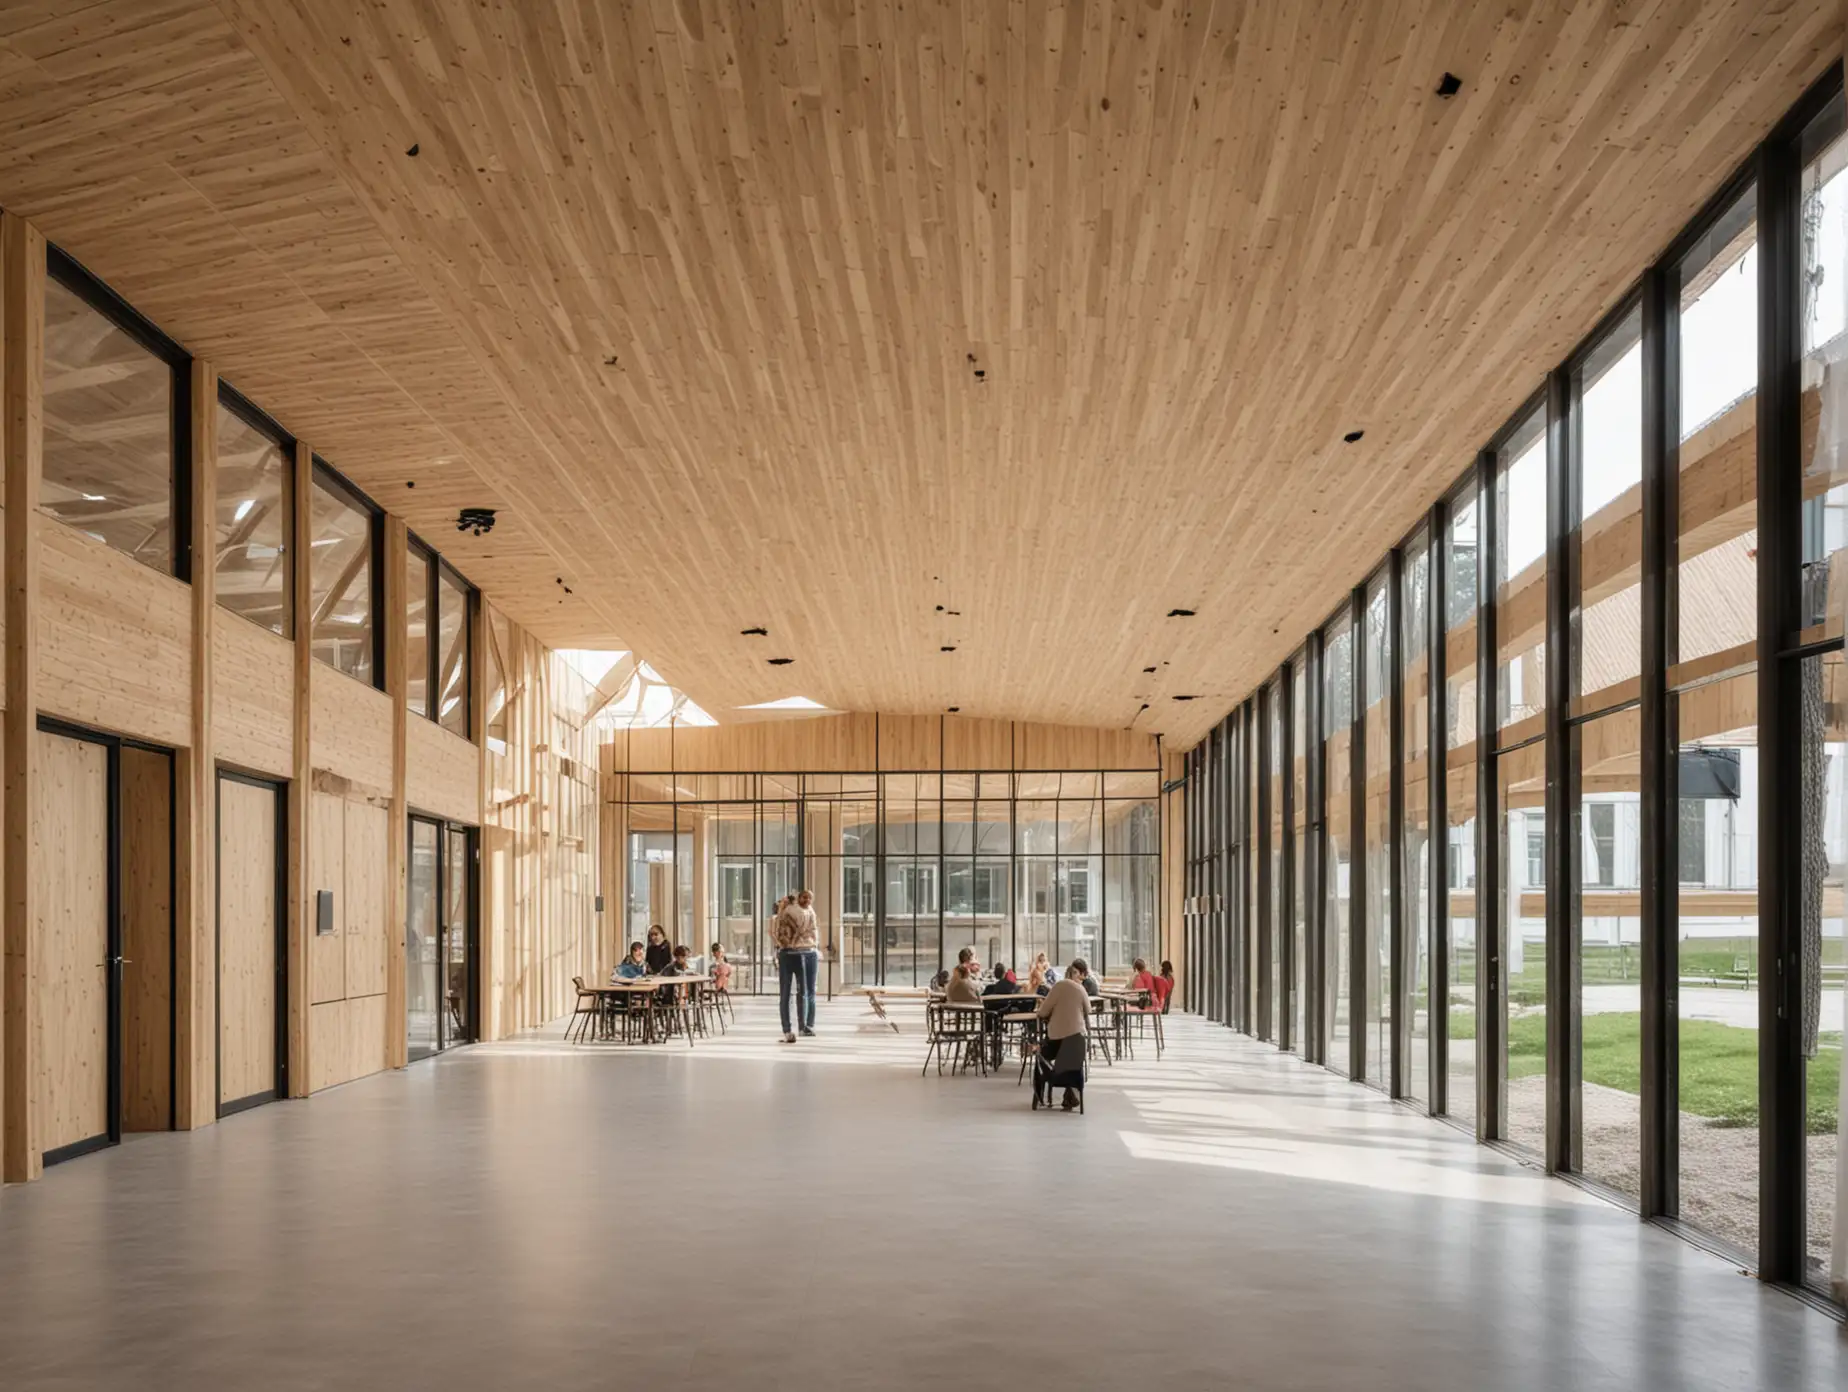 The large atrium runs through two classroom buildings of a timber structured school in ukrian. A large glass panel separates outside from inside

